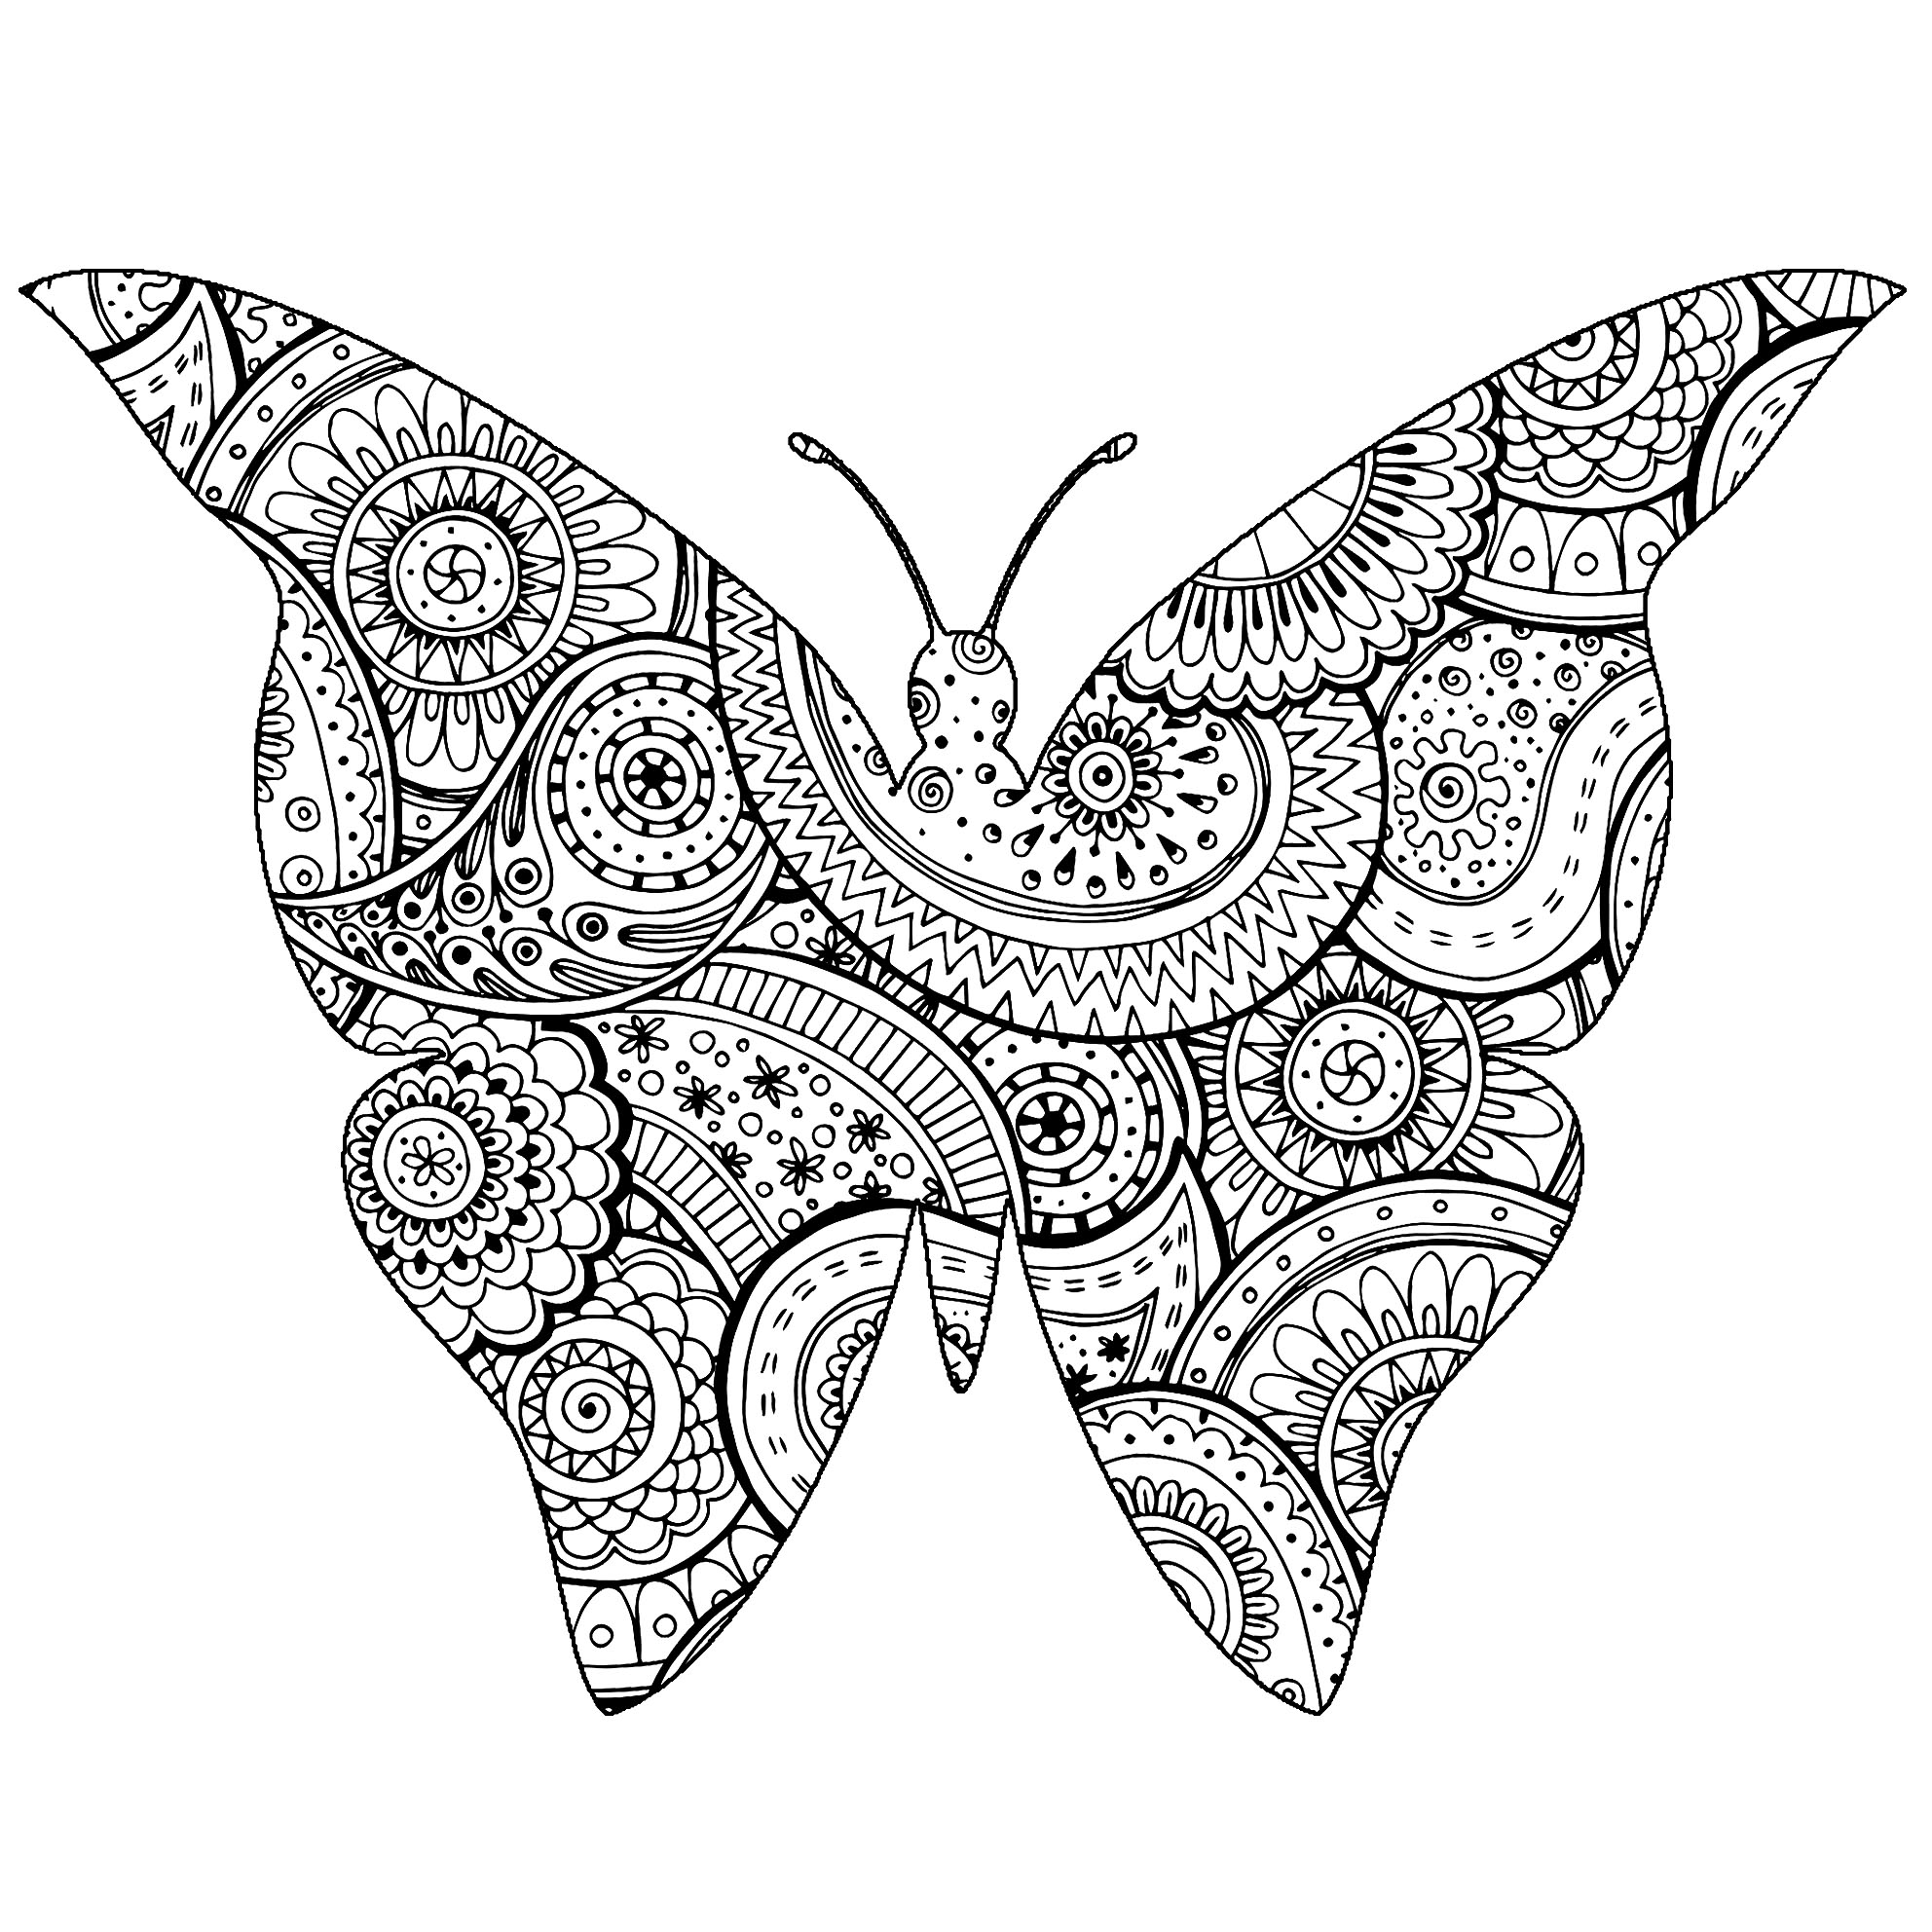 Download Butterfly shape with patterns - Butterflies & insects ...